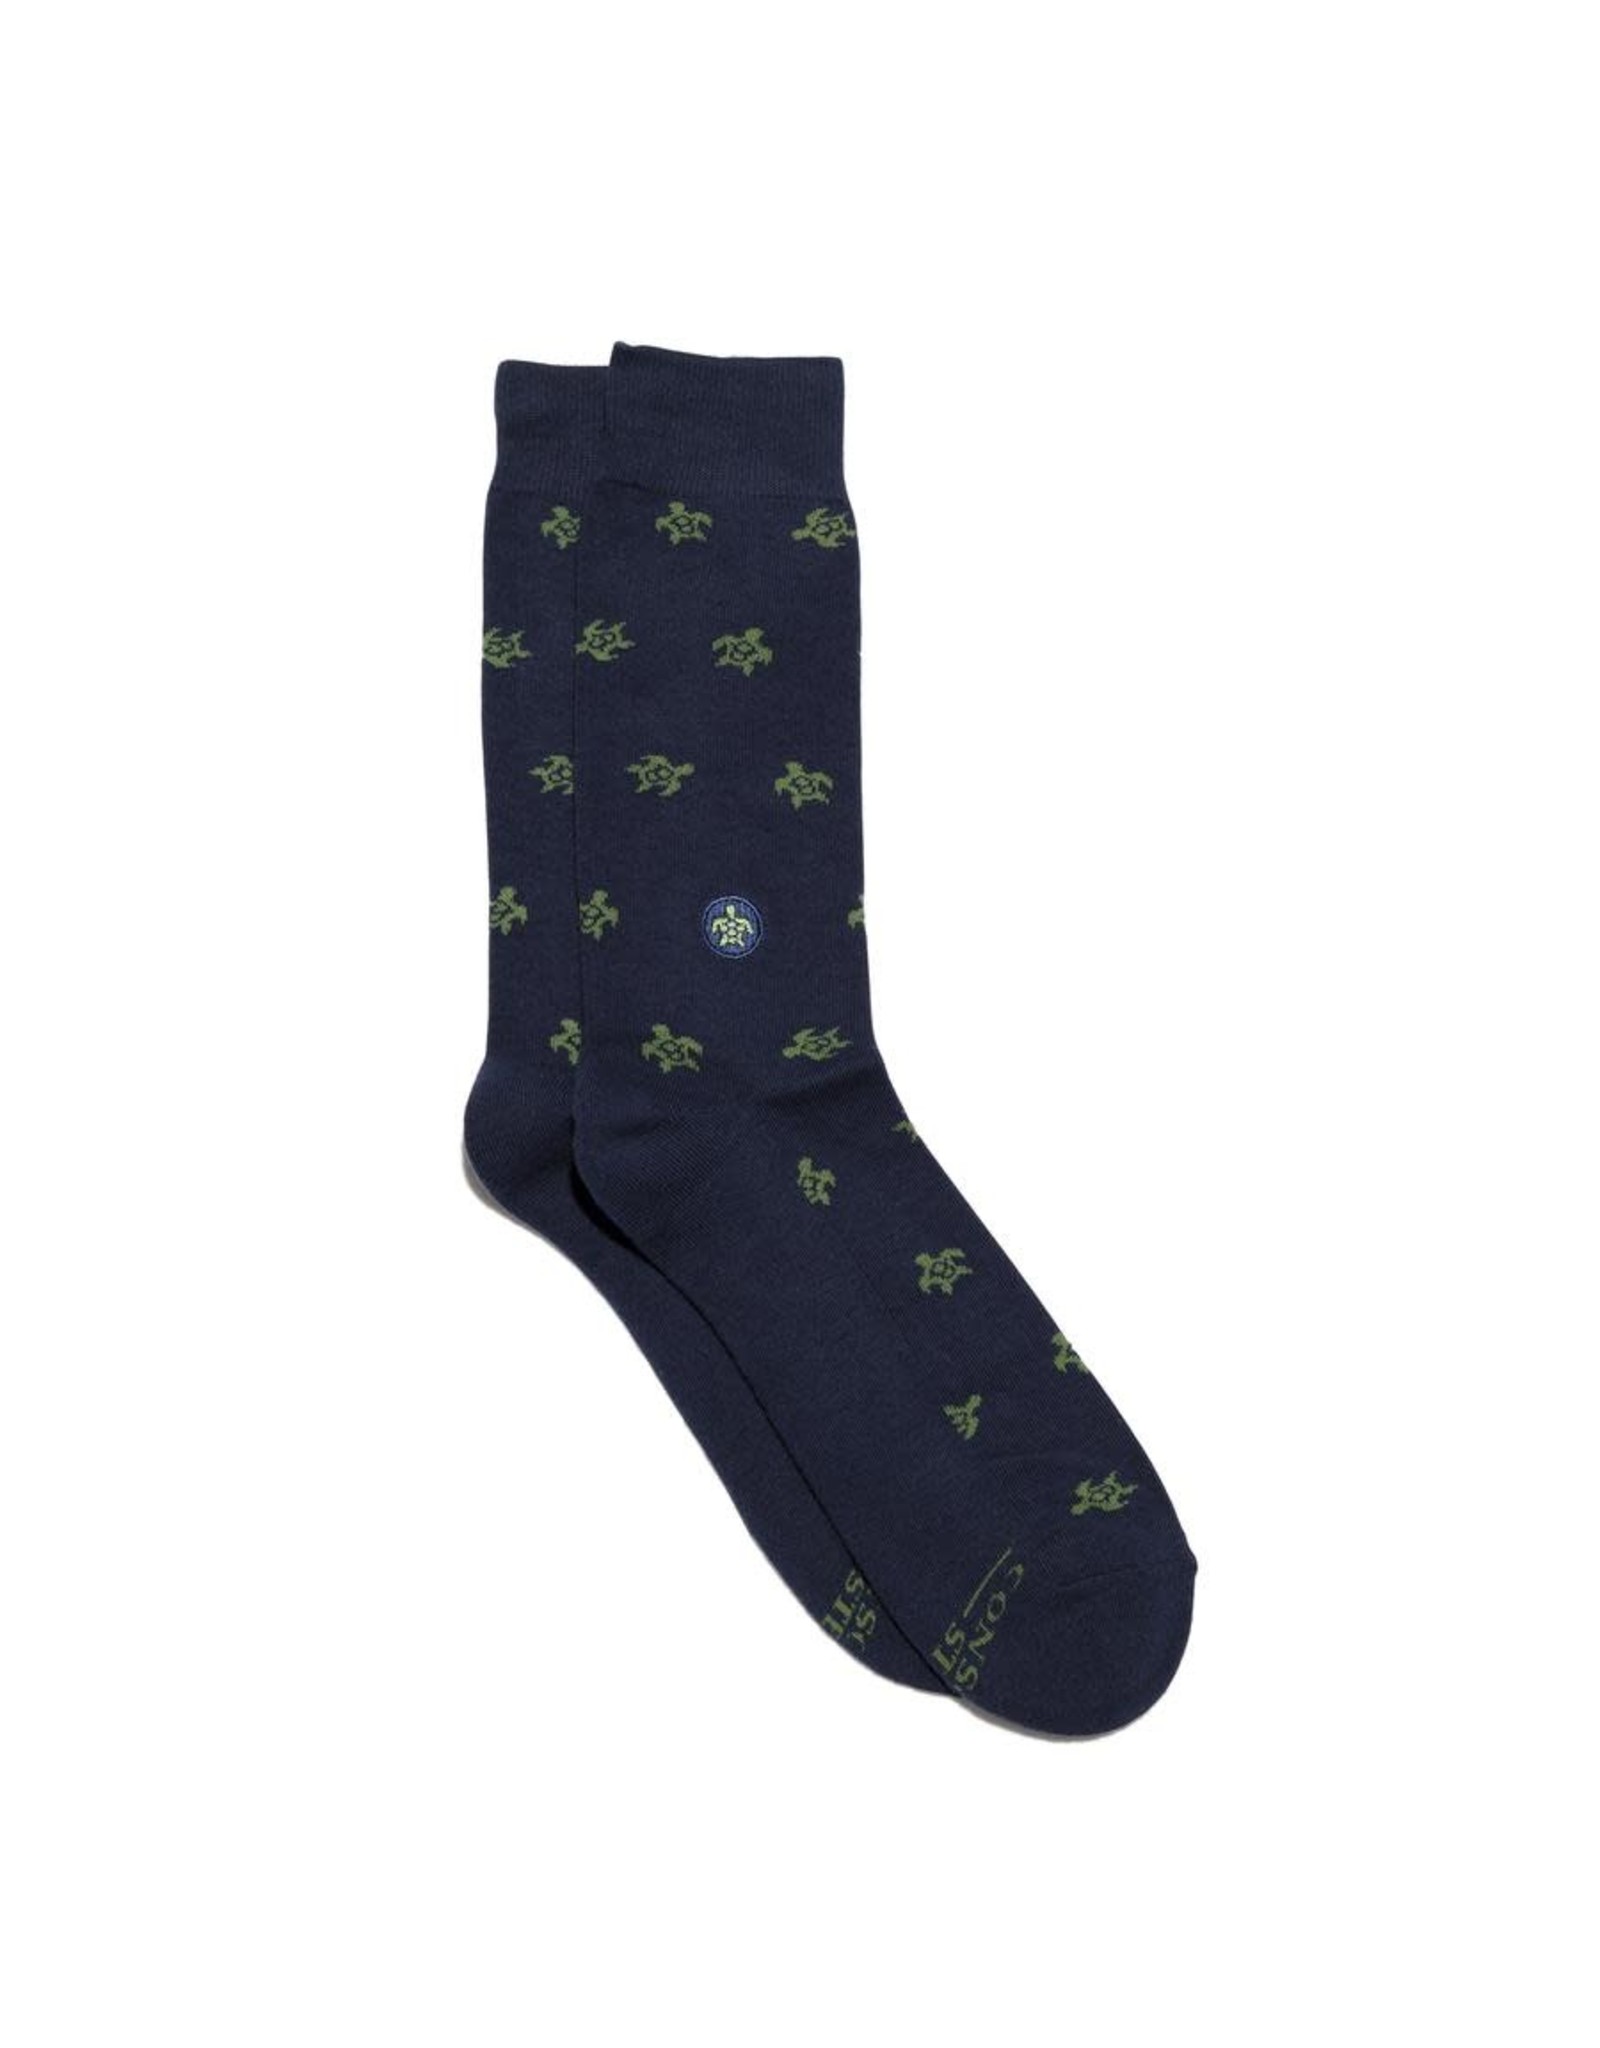 Trade roots Socks that Protect Turtles, Navy